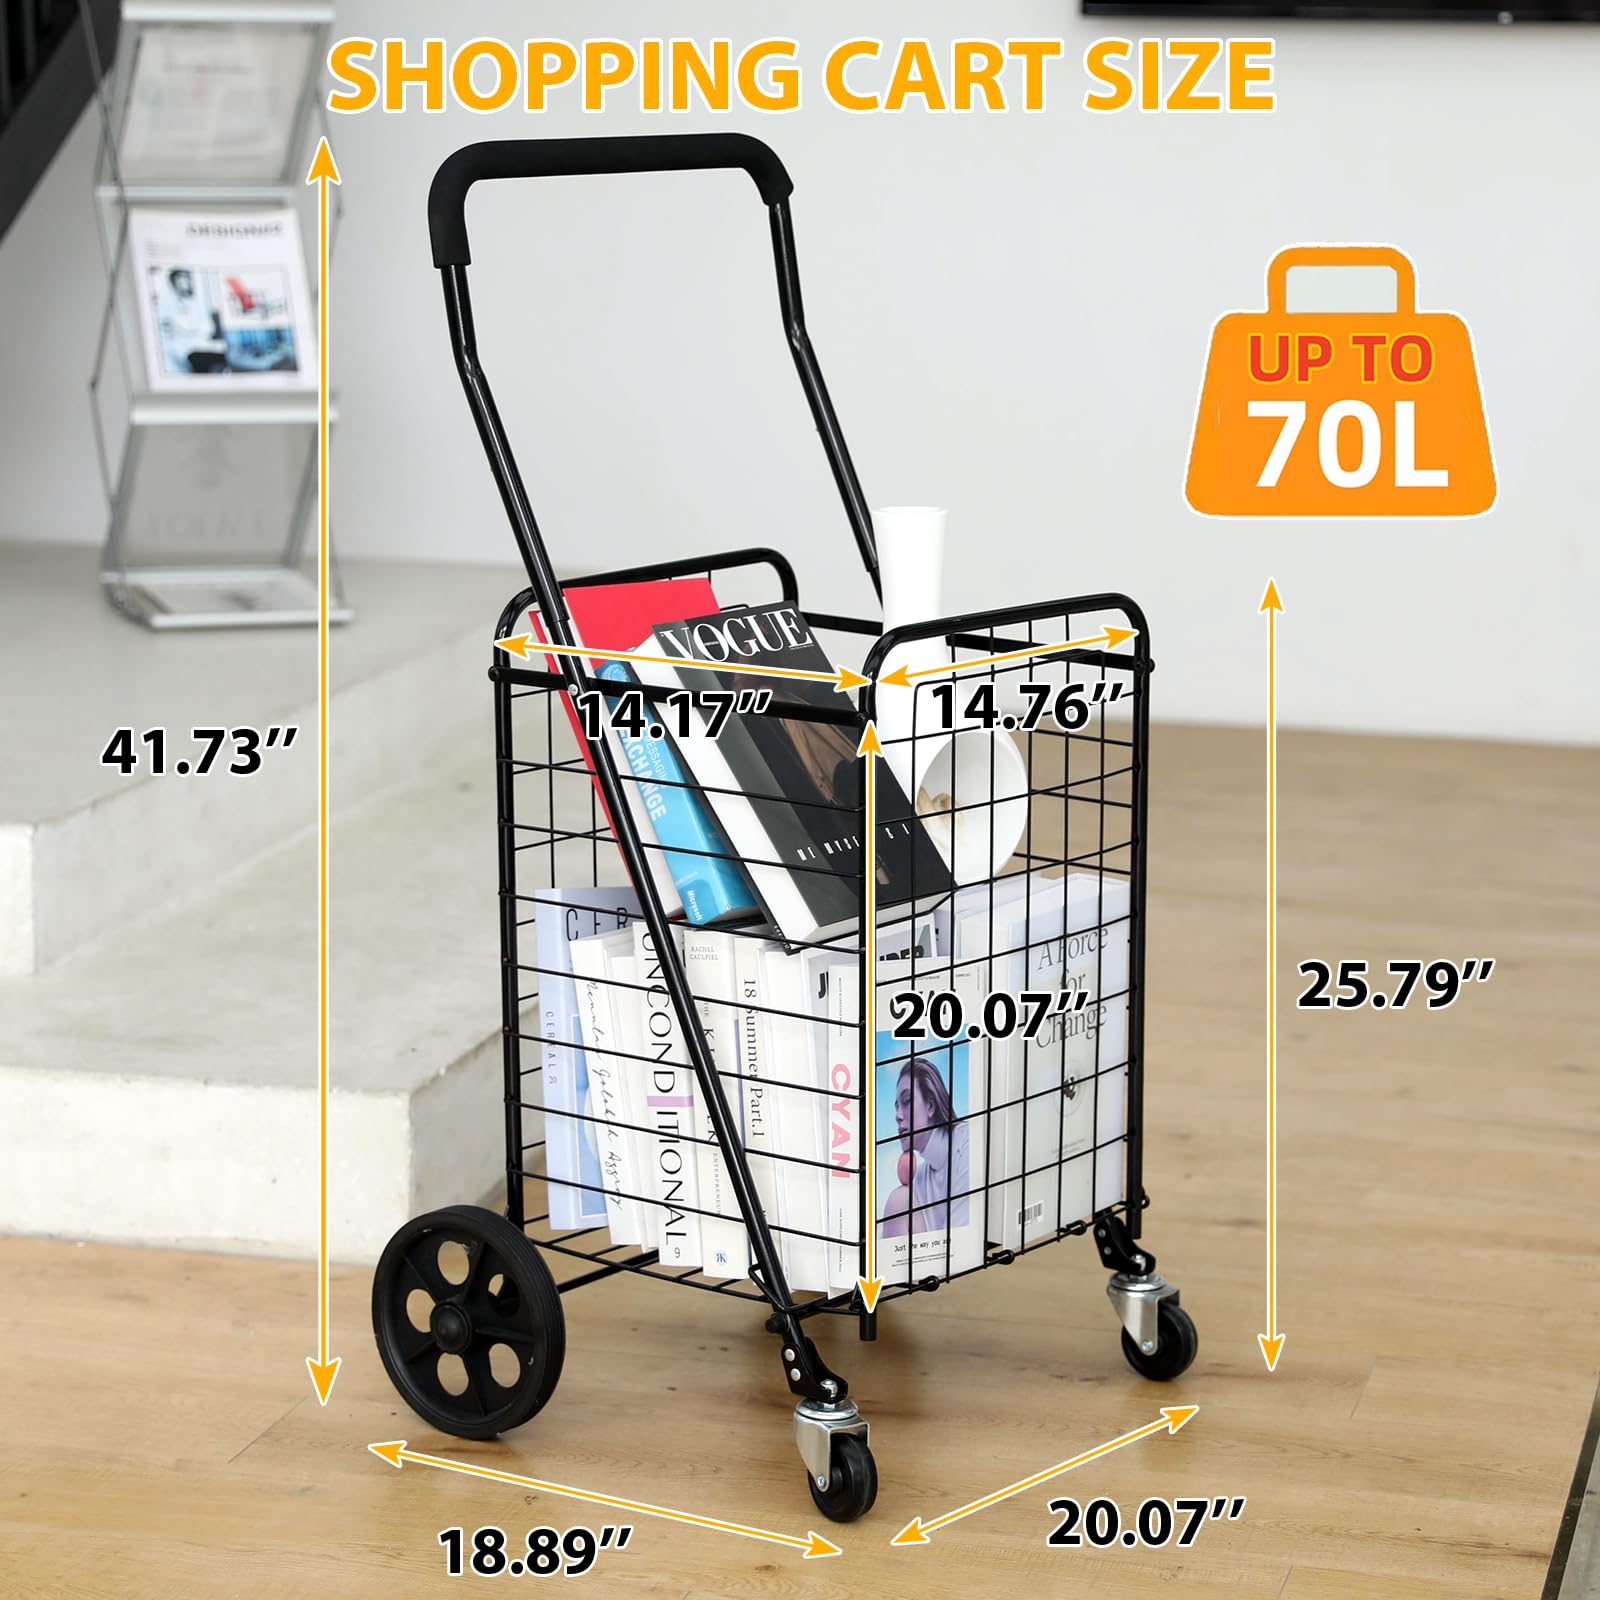 Kiffler Grocery Shopping Cart with 360° Rolling Swivel Wheels Utility Cart Easily Collapsible Cart 66lb Extended Foam Cover, Trolley for Laundry,Groceries,Travel Black (Medium)